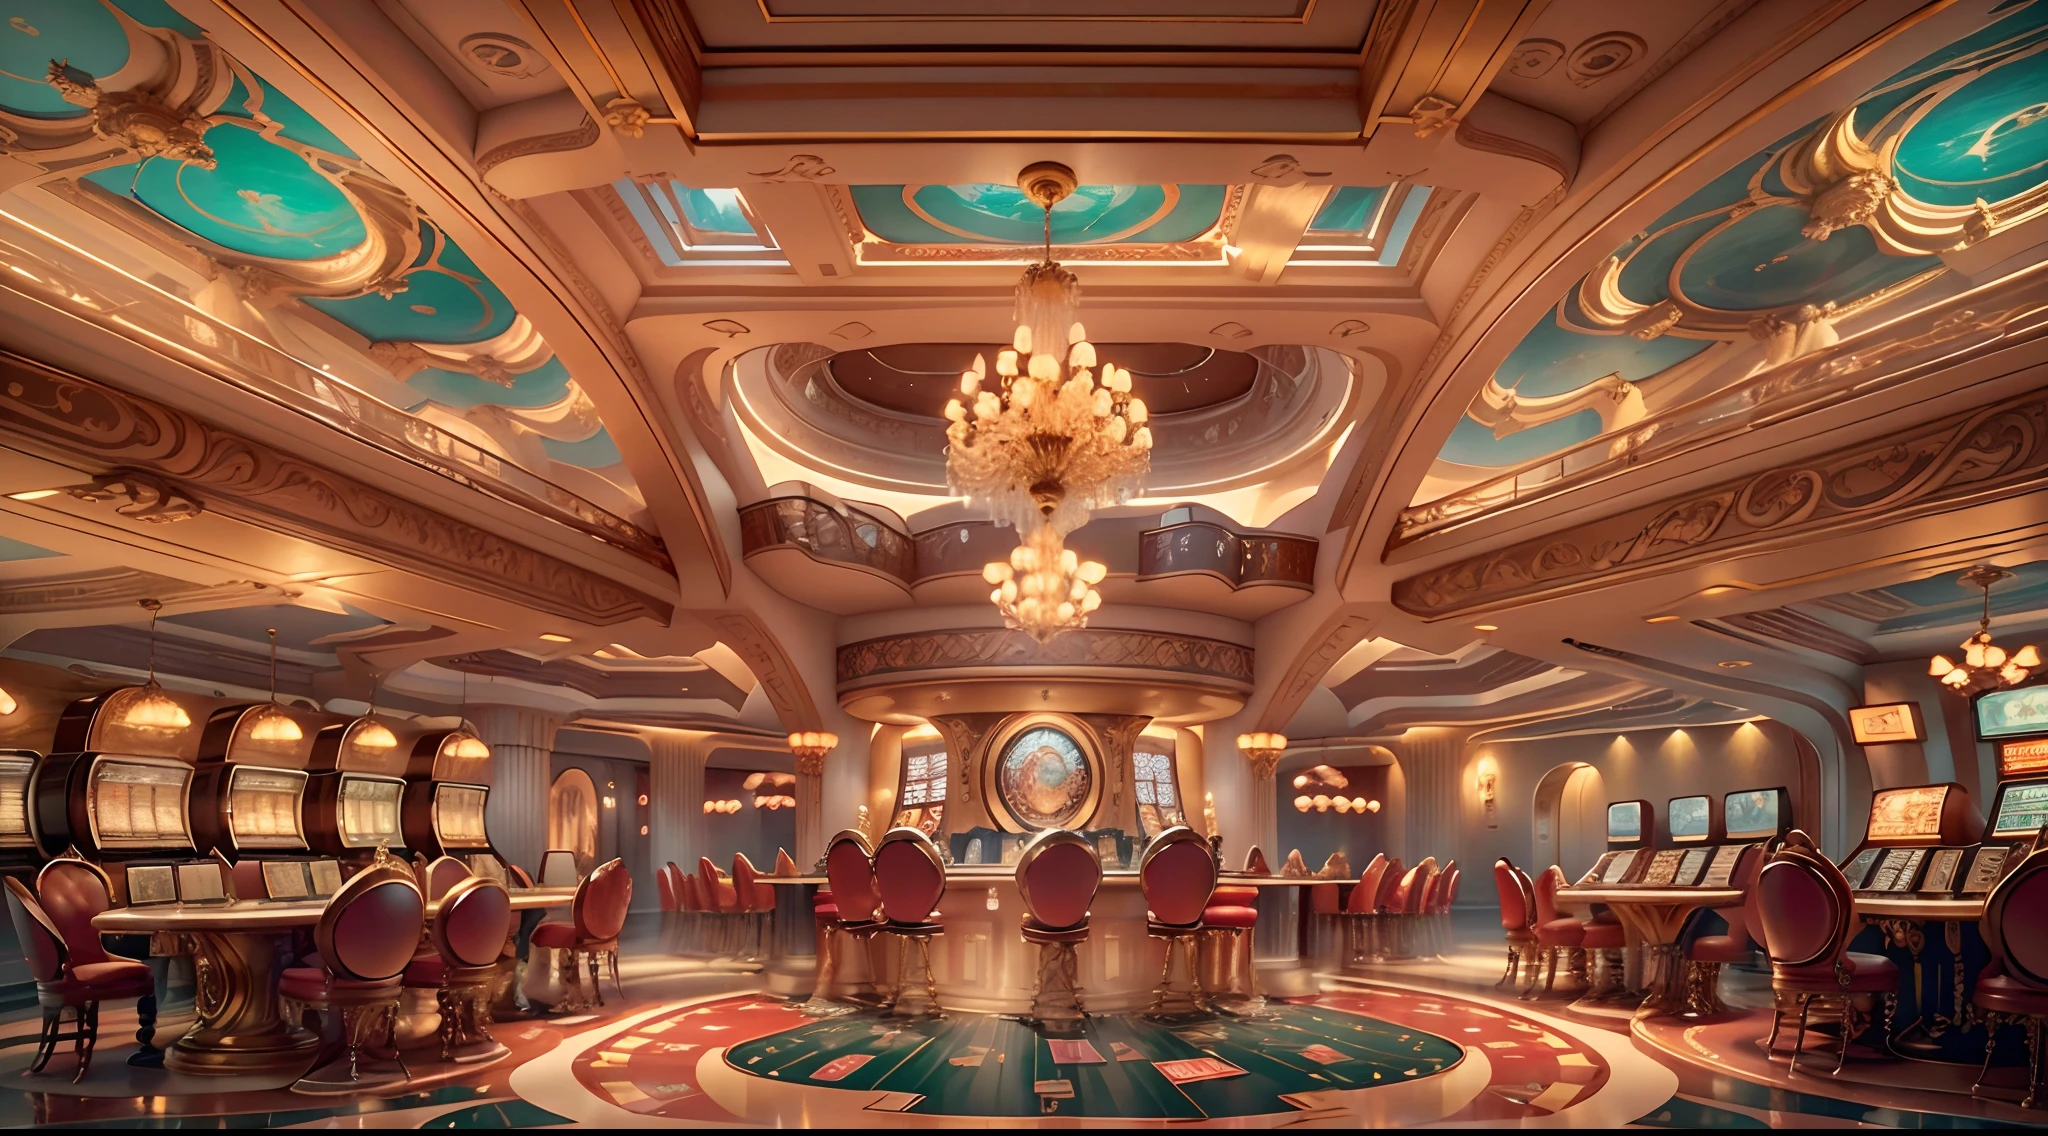 (Best quality,4K,8K,A high resolution,Masterpiece:1.2),Ultra-detailed,Realistic,Photorealistic:1.37,Large gambling casinos，The lights are shining,Richly decorated,Shiny chandelier,Luxurious marble floors,Spacious gaming tables，Comes with a detailed deck of cards, Professional poker chips, and elegant roulette roulette,Towering slot machines，Color screen and flashing lights,Charming live music performed by a jazz band,Fine glassware and champagne bottles in the VIP lounge area,Impressive ceiling frescoes depict scenes of victory and fortune,Gravity-defying architecture and stunning glass facades, Magnificent aerial view of the entire casino complex at night,Dynamic interaction of shadows and light, Create captivating visual spectacle,Impeccable tailoring and glamorous clothing complement the refined atmosphere,Natural sunlight streams through the large windows,Illuminate the scene with a warm and inviting light.